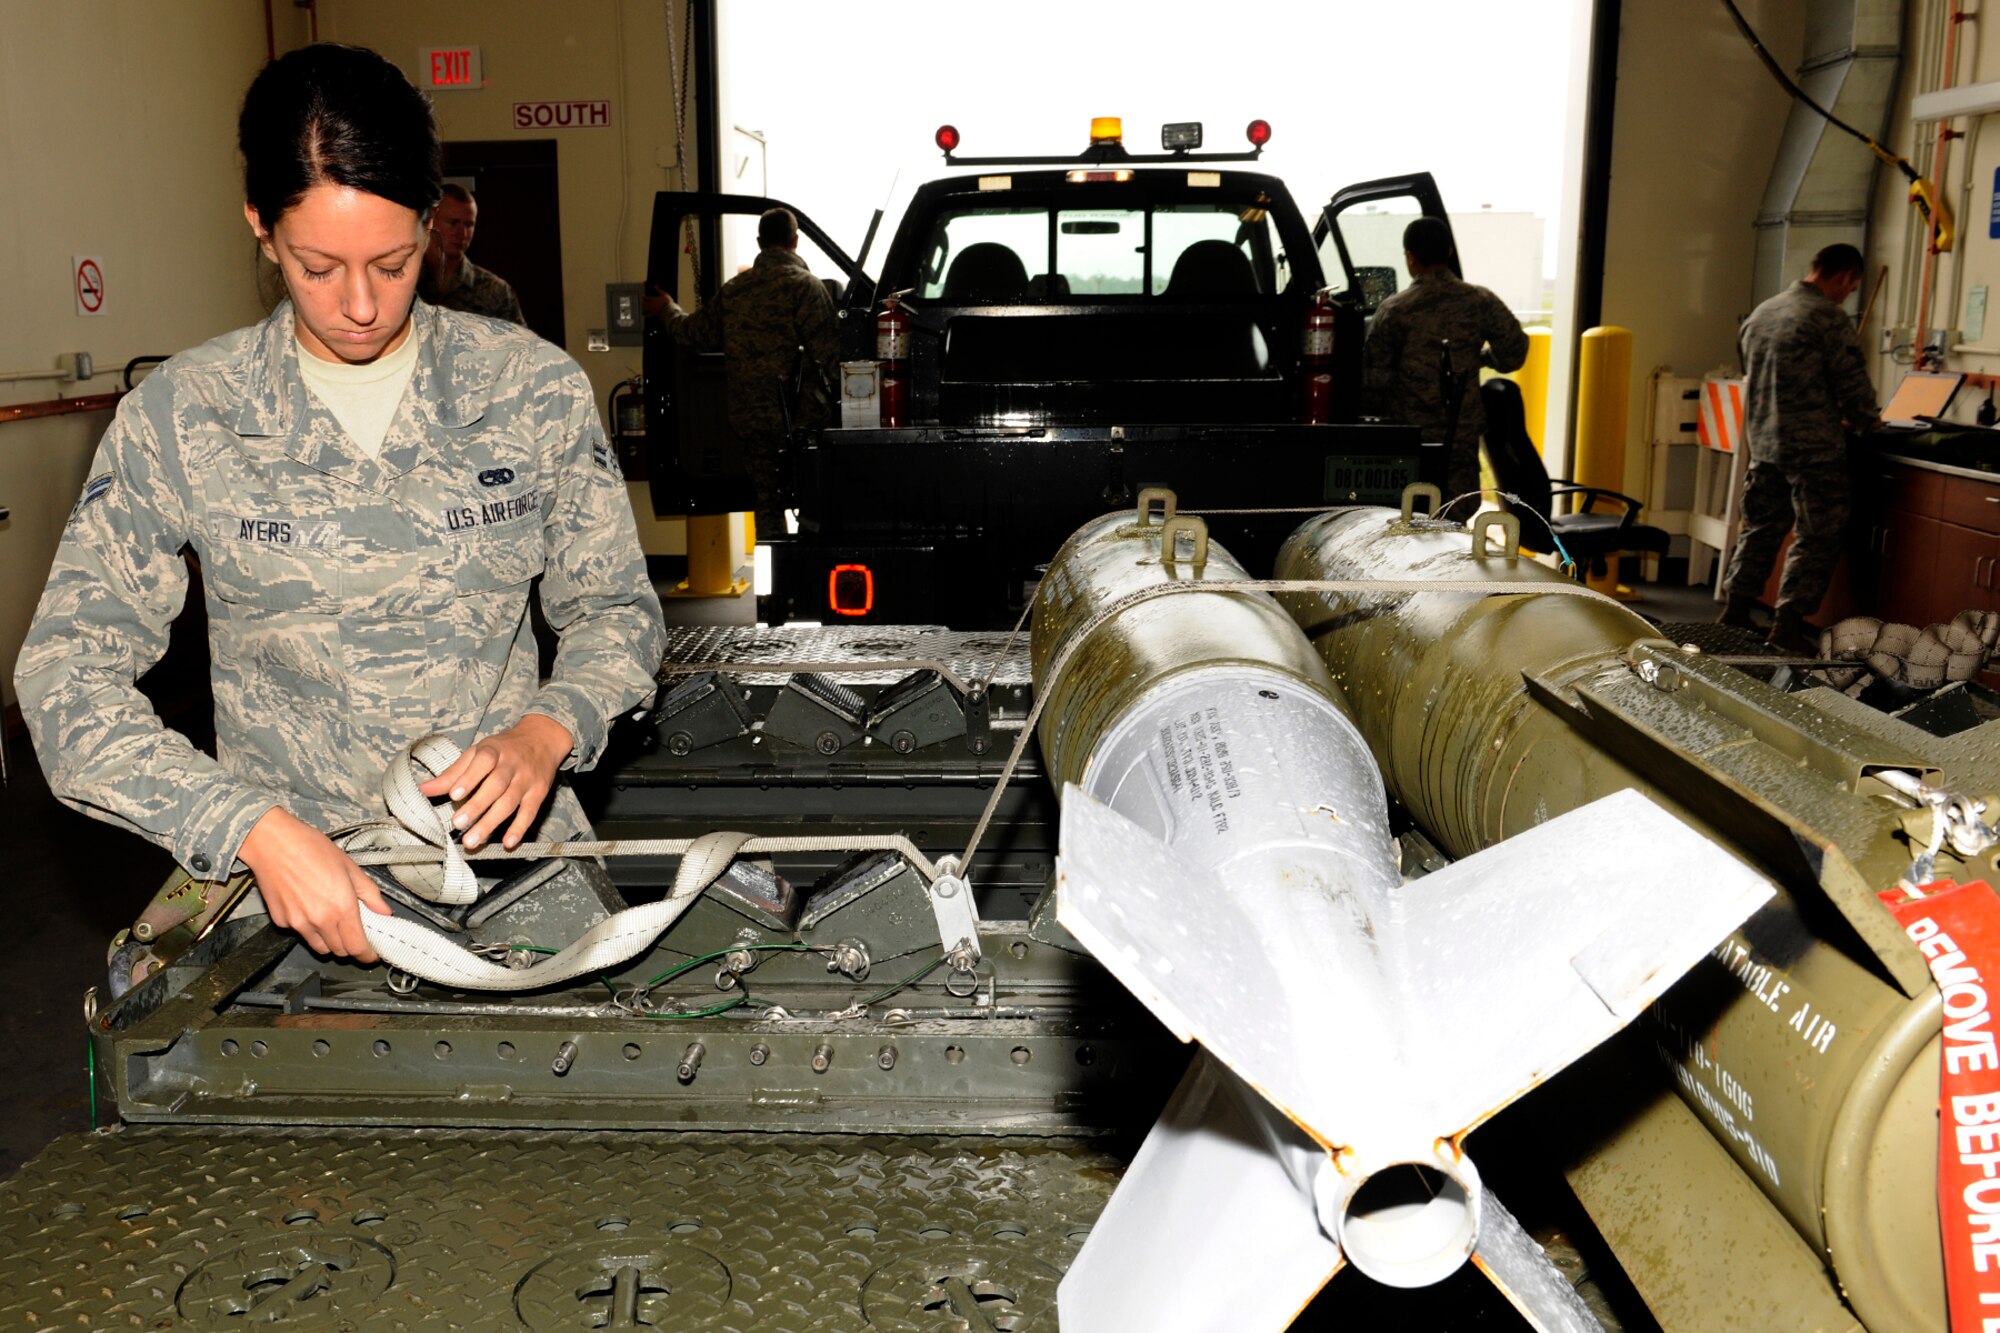 131102-Z-EZ686-168 Airman 1st Class Brianna Ayers, 127th Maintenance Squadro,n secures two test bombs for transportation at Selfridge Air National Guard Base, Mich., Nov. 2, 2013. Ayers said she finds her work challenging and enjoys what she does. (U.S. Air National Guard photo by MSgt. David Kujawa/Released)